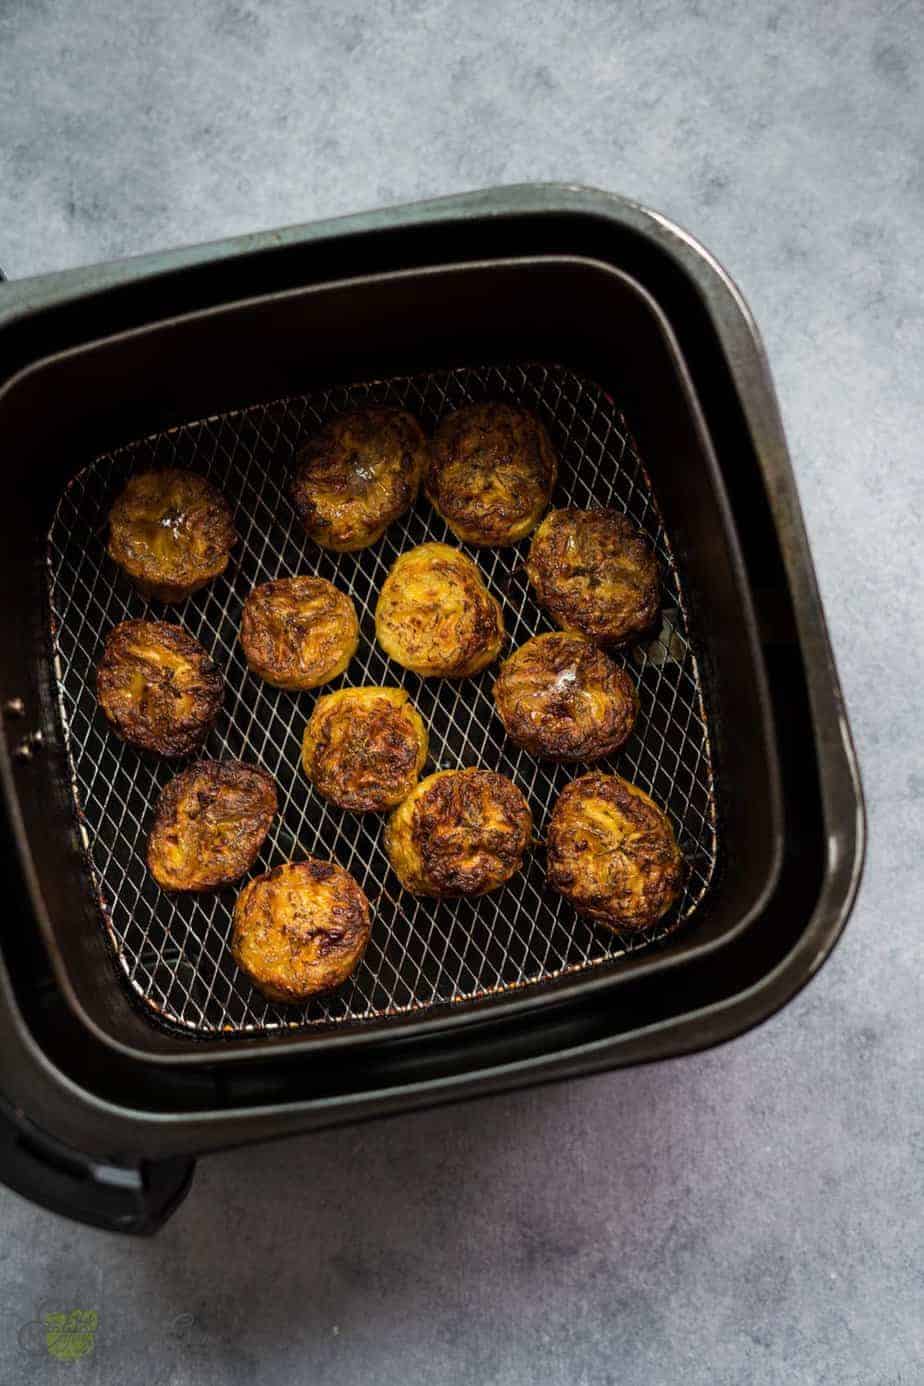 freshly fried plantains air fryer in the basket basket. with a golden brown color and crispy texture in the outside and soft and sweet inside.